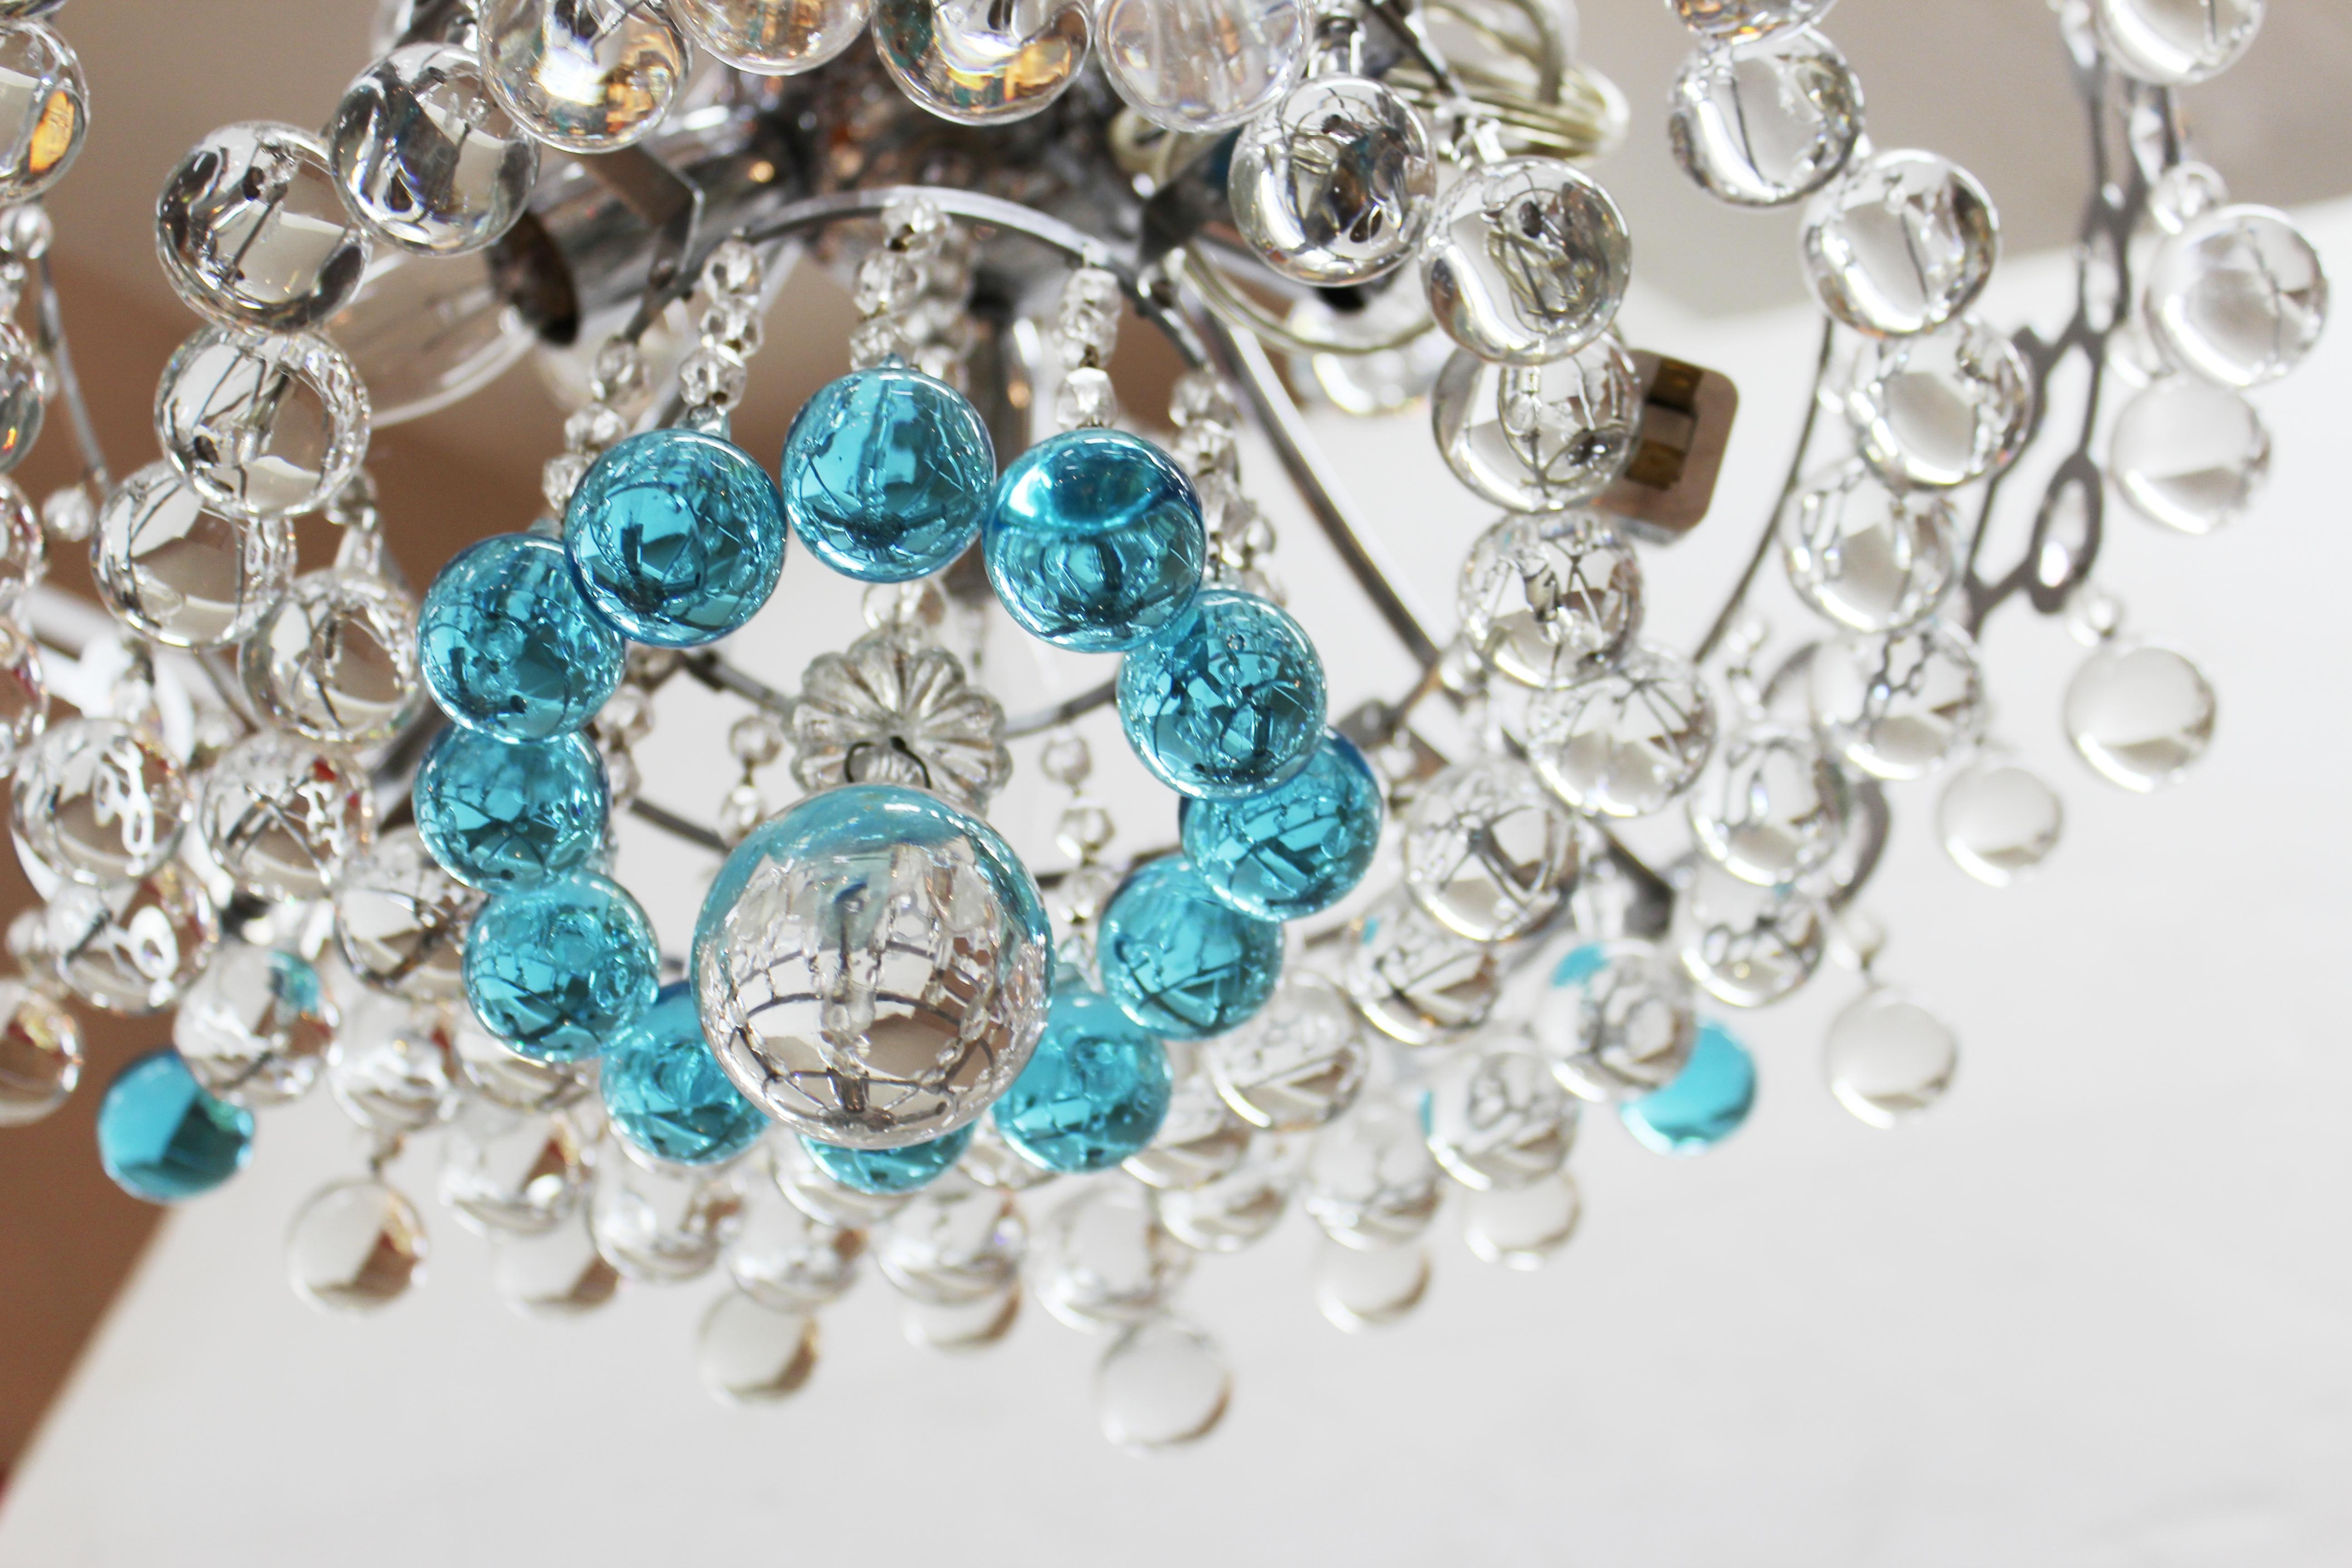 Italian Mid-Century Modern Chrome Chandelier with Clear & Turquoise Glass Balls 6